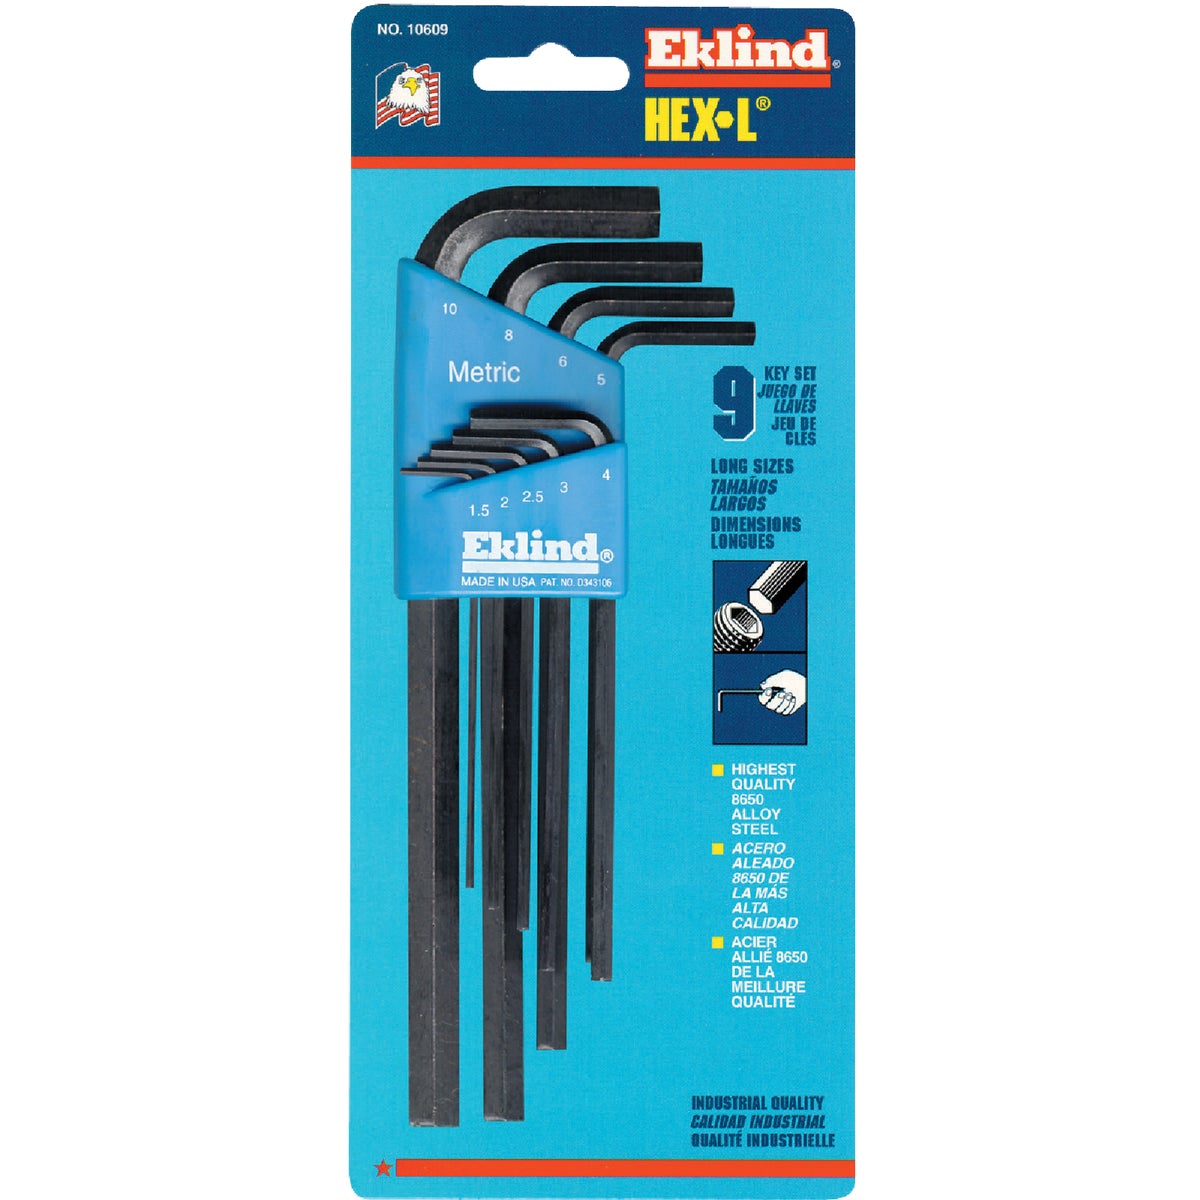 Item 385050, Includes hex key wrenches in sizes: 1.5mm, 2mm, 2.